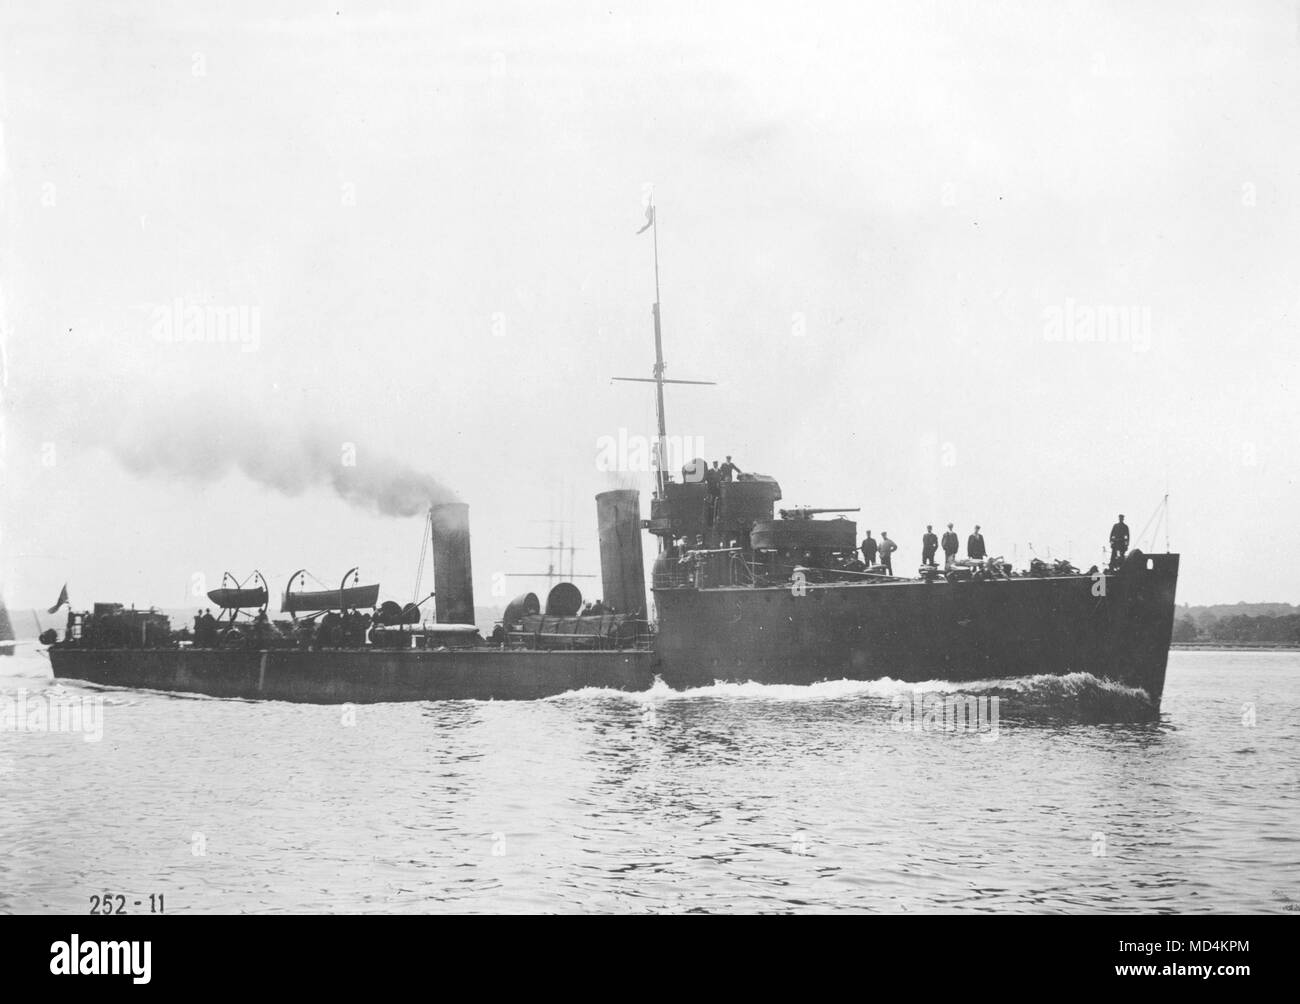 AJAXNETPHOTO. 1903. AT SEA, UK TERRITORIAL WATERS. - RIVER CLASS DESTROYER - HMS COLNE - BUILT BY J. THORNYCROFT IN 1903. LENGTH 225 FEET, DISPLACEMENT 595 TONS. SPEED 25.5 KNOTS. PHOTO:VT COLLECTION/AJAXNETPHOTO REF:AVL/HMS COLNE VT252 11 Stock Photo